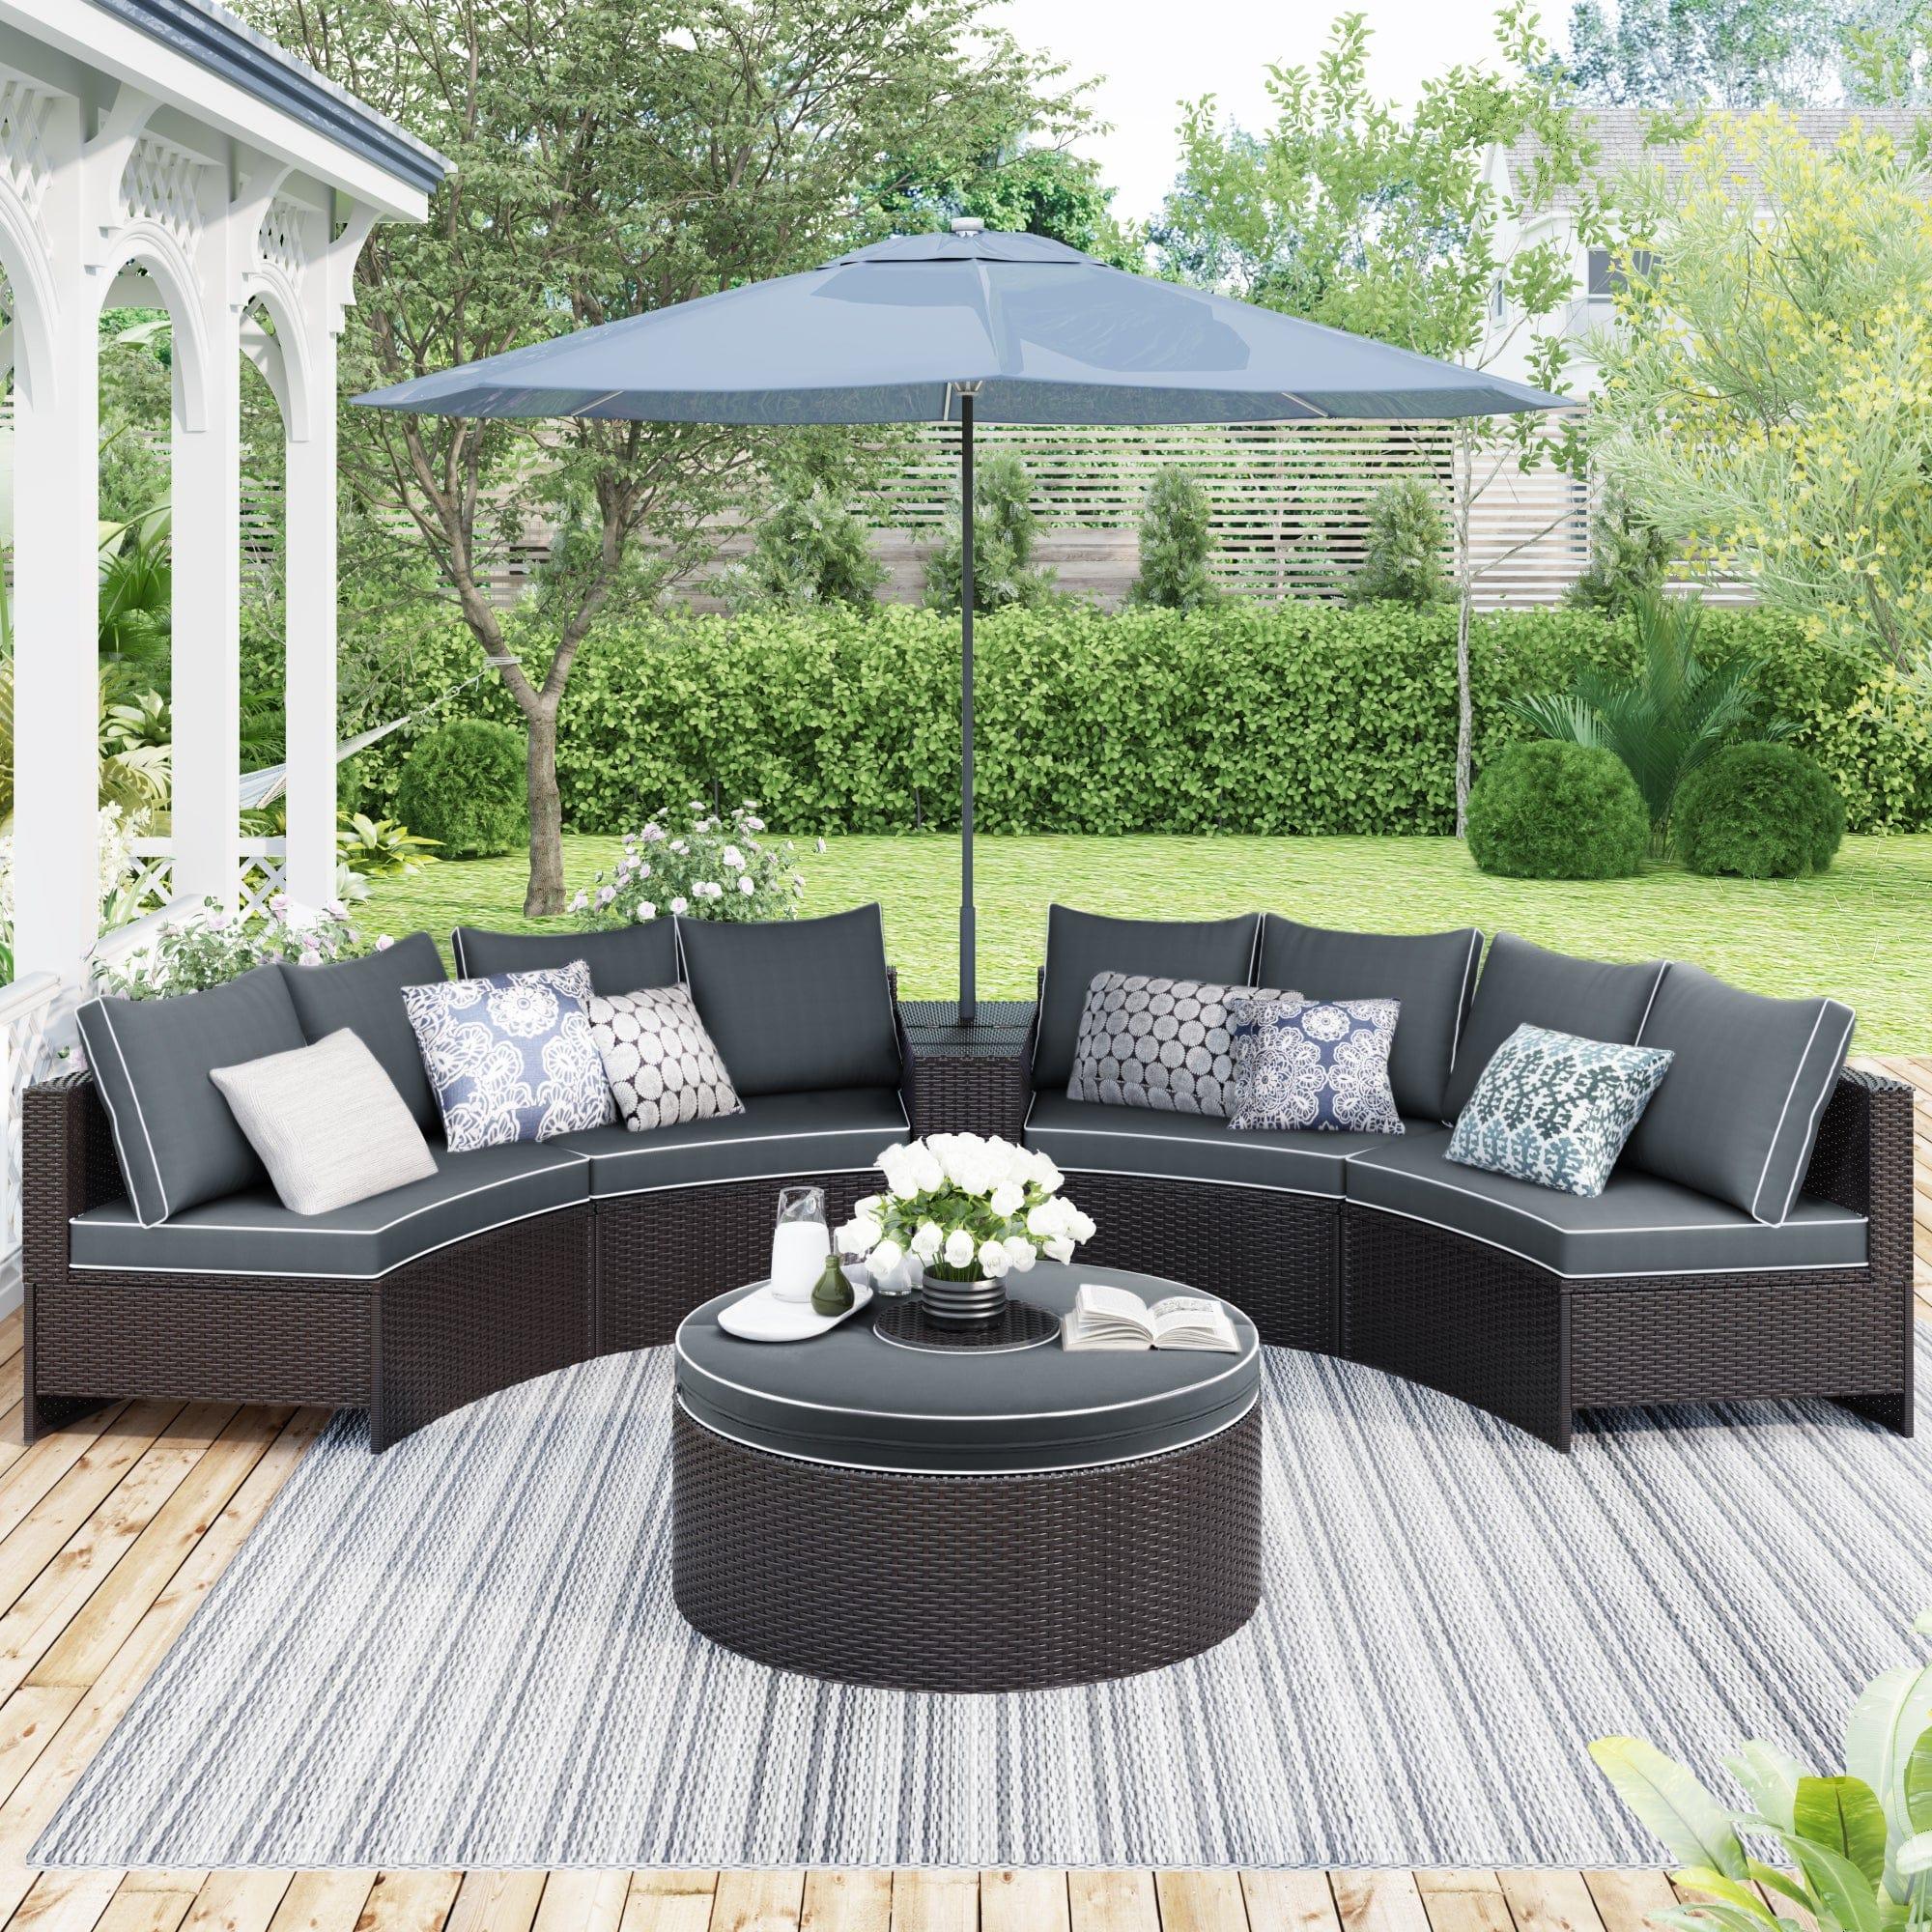 Shop TOPMAX 6 Pieces Outdoor Sectional Half Round Patio Rattan Sofa Set, PE Wicker Conversation Furniture Set w/ One Storage Side Table for Umbrella and One Multifunctional Round Table, Brown+ Gray Mademoiselle Home Decor